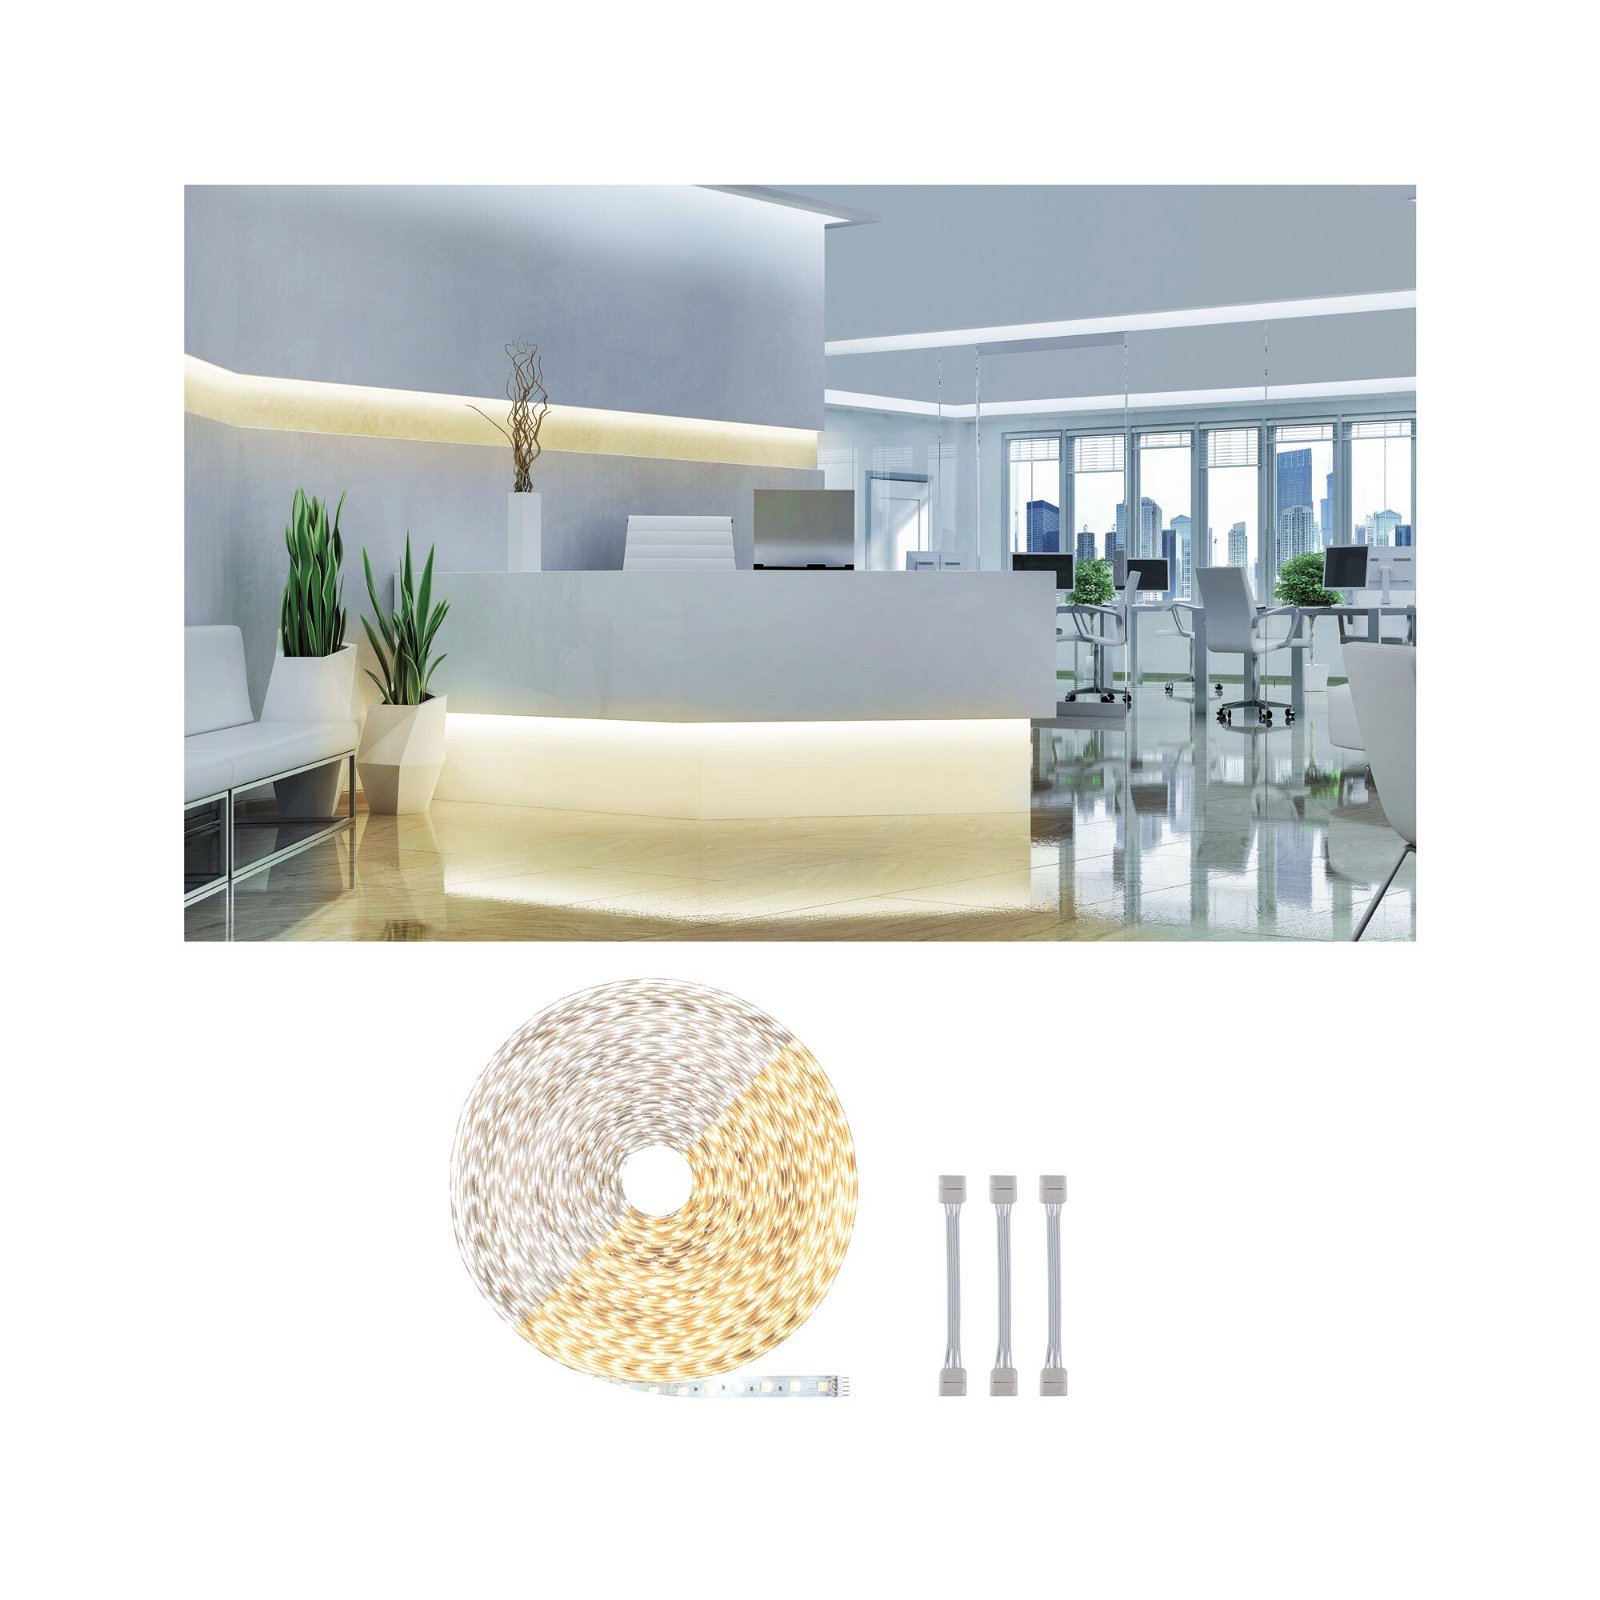 MaxLED 500 LED Strip Tunable White Individual strip incl. adapter cable 20m 72W 550lm/m 60 LEDs/m Tunable White